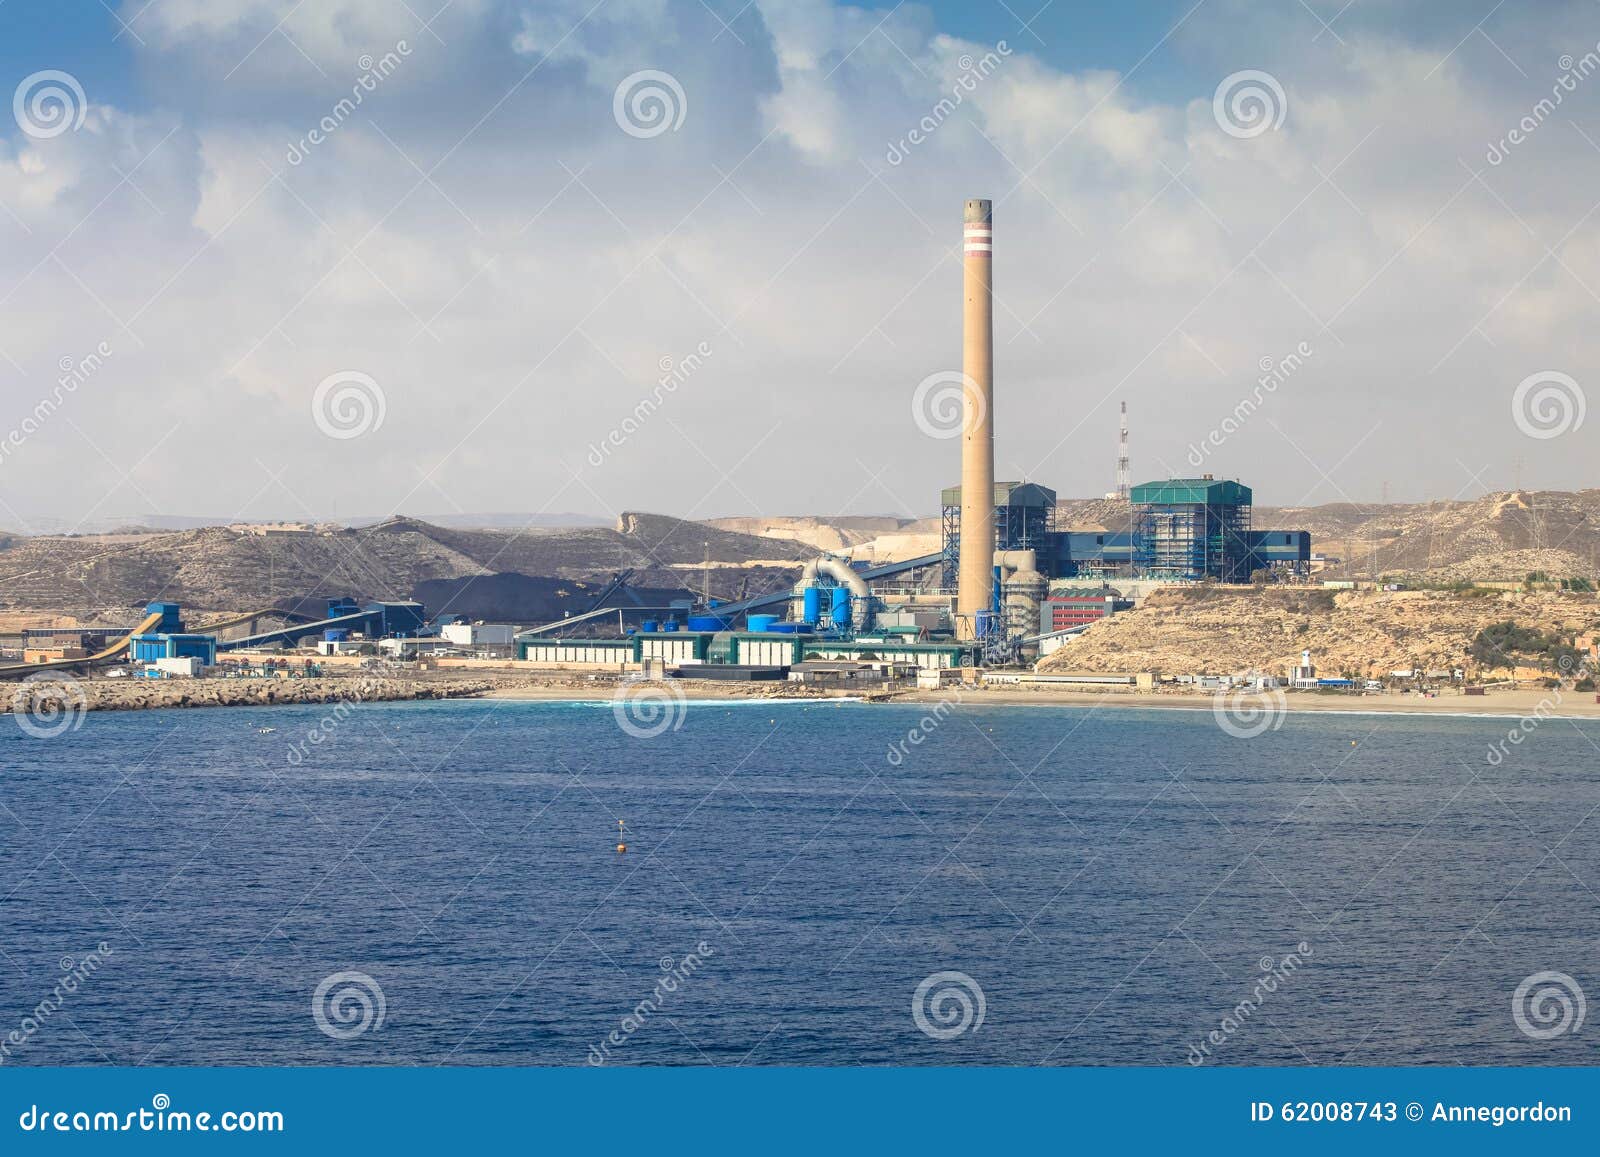 litoral thermal power station: carboneras power plant